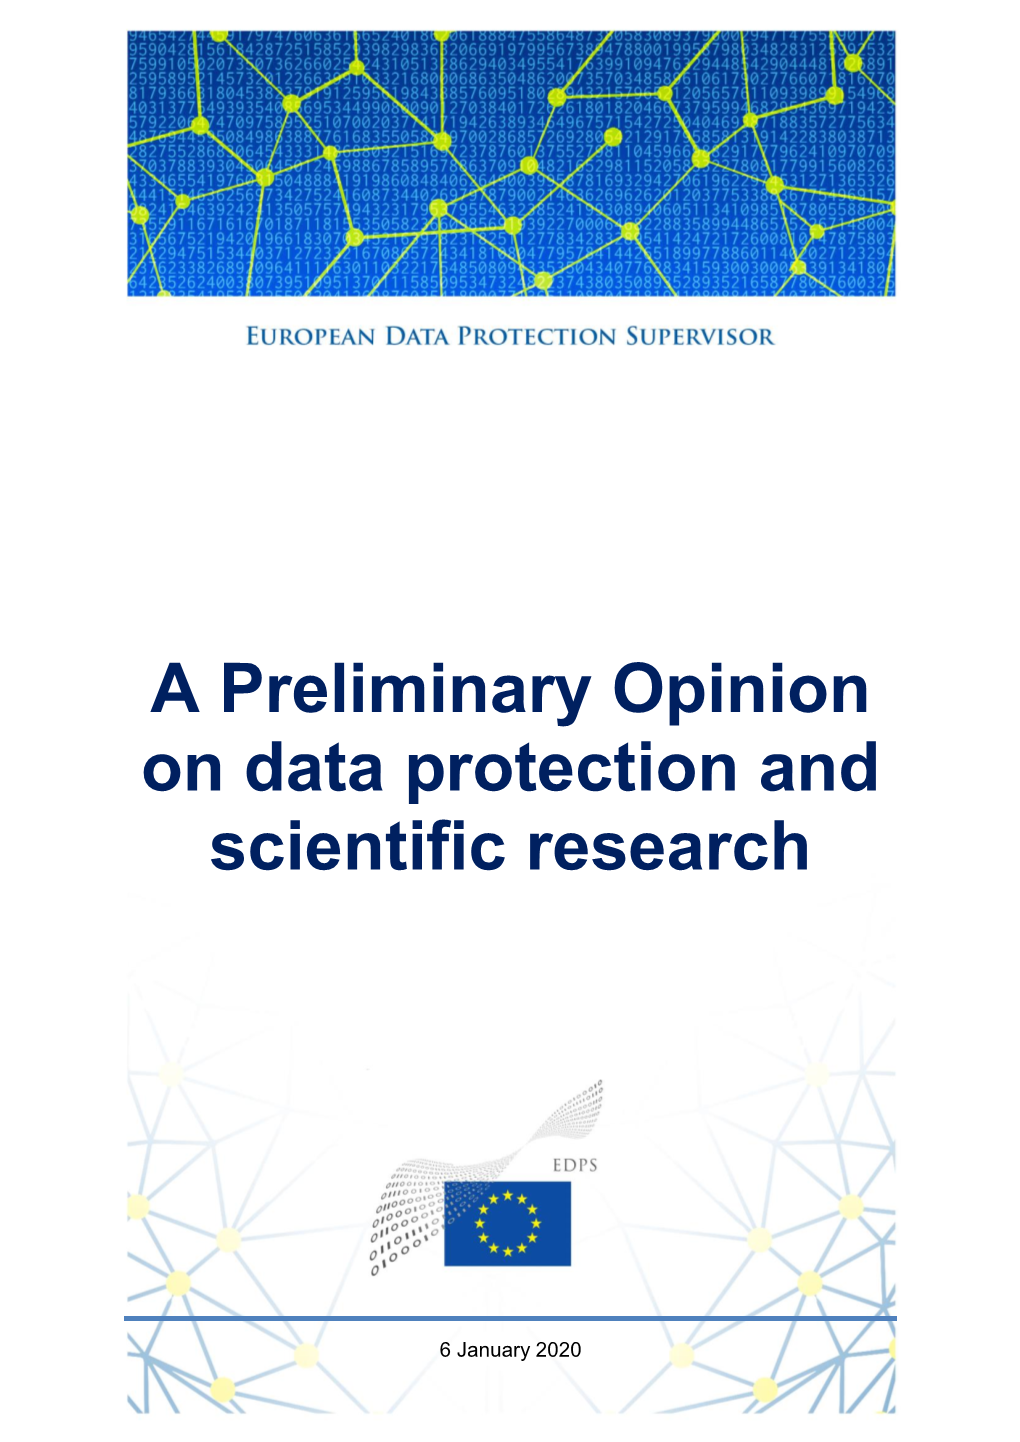 A Preliminary Opinion on Data Protection and Scientific Research